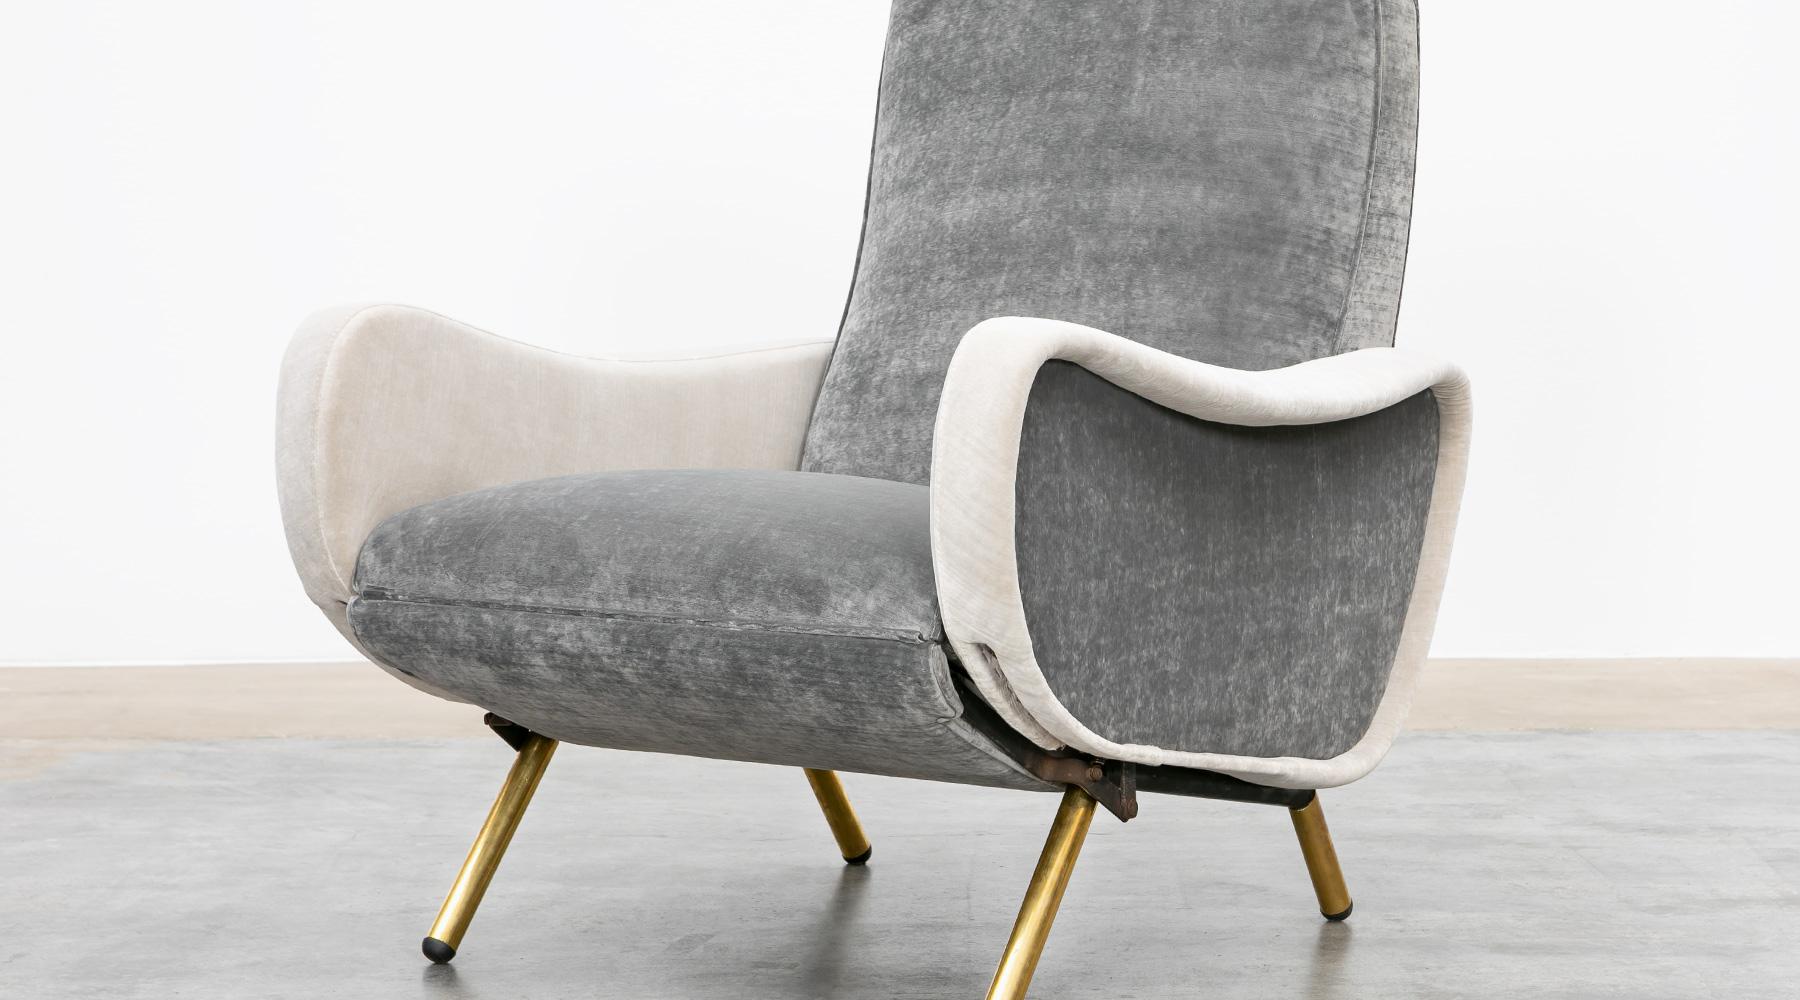 1950s New Upholstery in Grey, Brass Legs, Pair of Lounge Chairs by Marco Zanuso 7